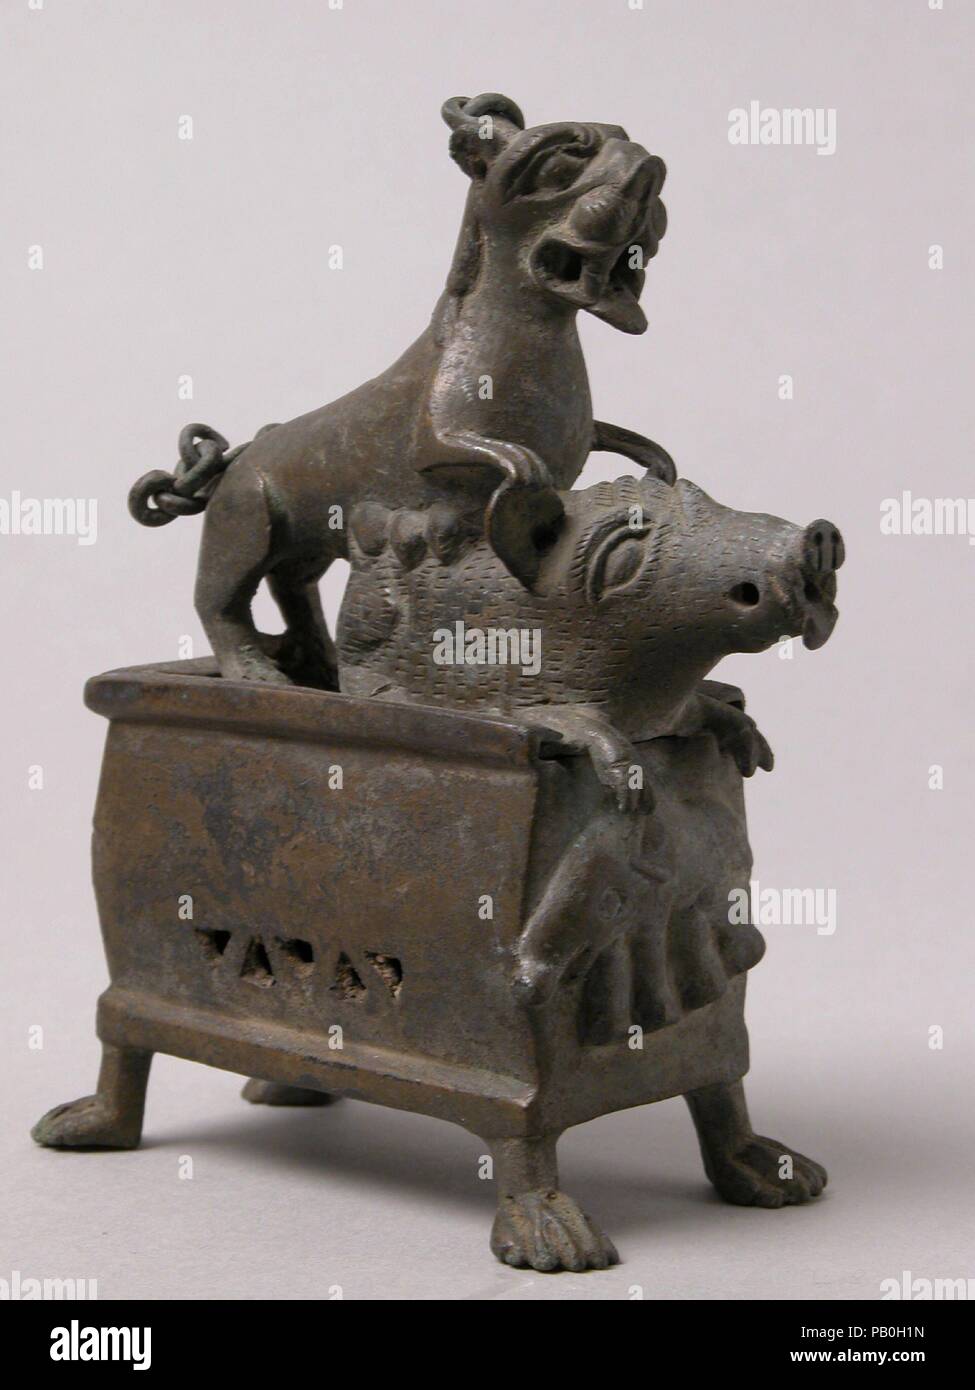 Censer with a Lioness Hunting a Boar. Culture: Coptic. Dimensions: Overall: 5 3/16 x 4 1/8 x 2 1/16 in. (13.2 x 10.4 x 5.3 cm)  Overall (with chain suspended): 8 13/16 x 4 1/8 x 2 1/16 in. (22.4 x 10.4 x 5.3 cm). Date: 6th-7th century.  Discovered hidden in a rock crevice, this censer was cast so that the smoke of the incense would emerge through the mouths and ears of the lioness and boar. An elephant worked in relief, rather than a Christian symbol, appears on its front. Museum: Metropolitan Museum of Art, New York, USA. Stock Photo